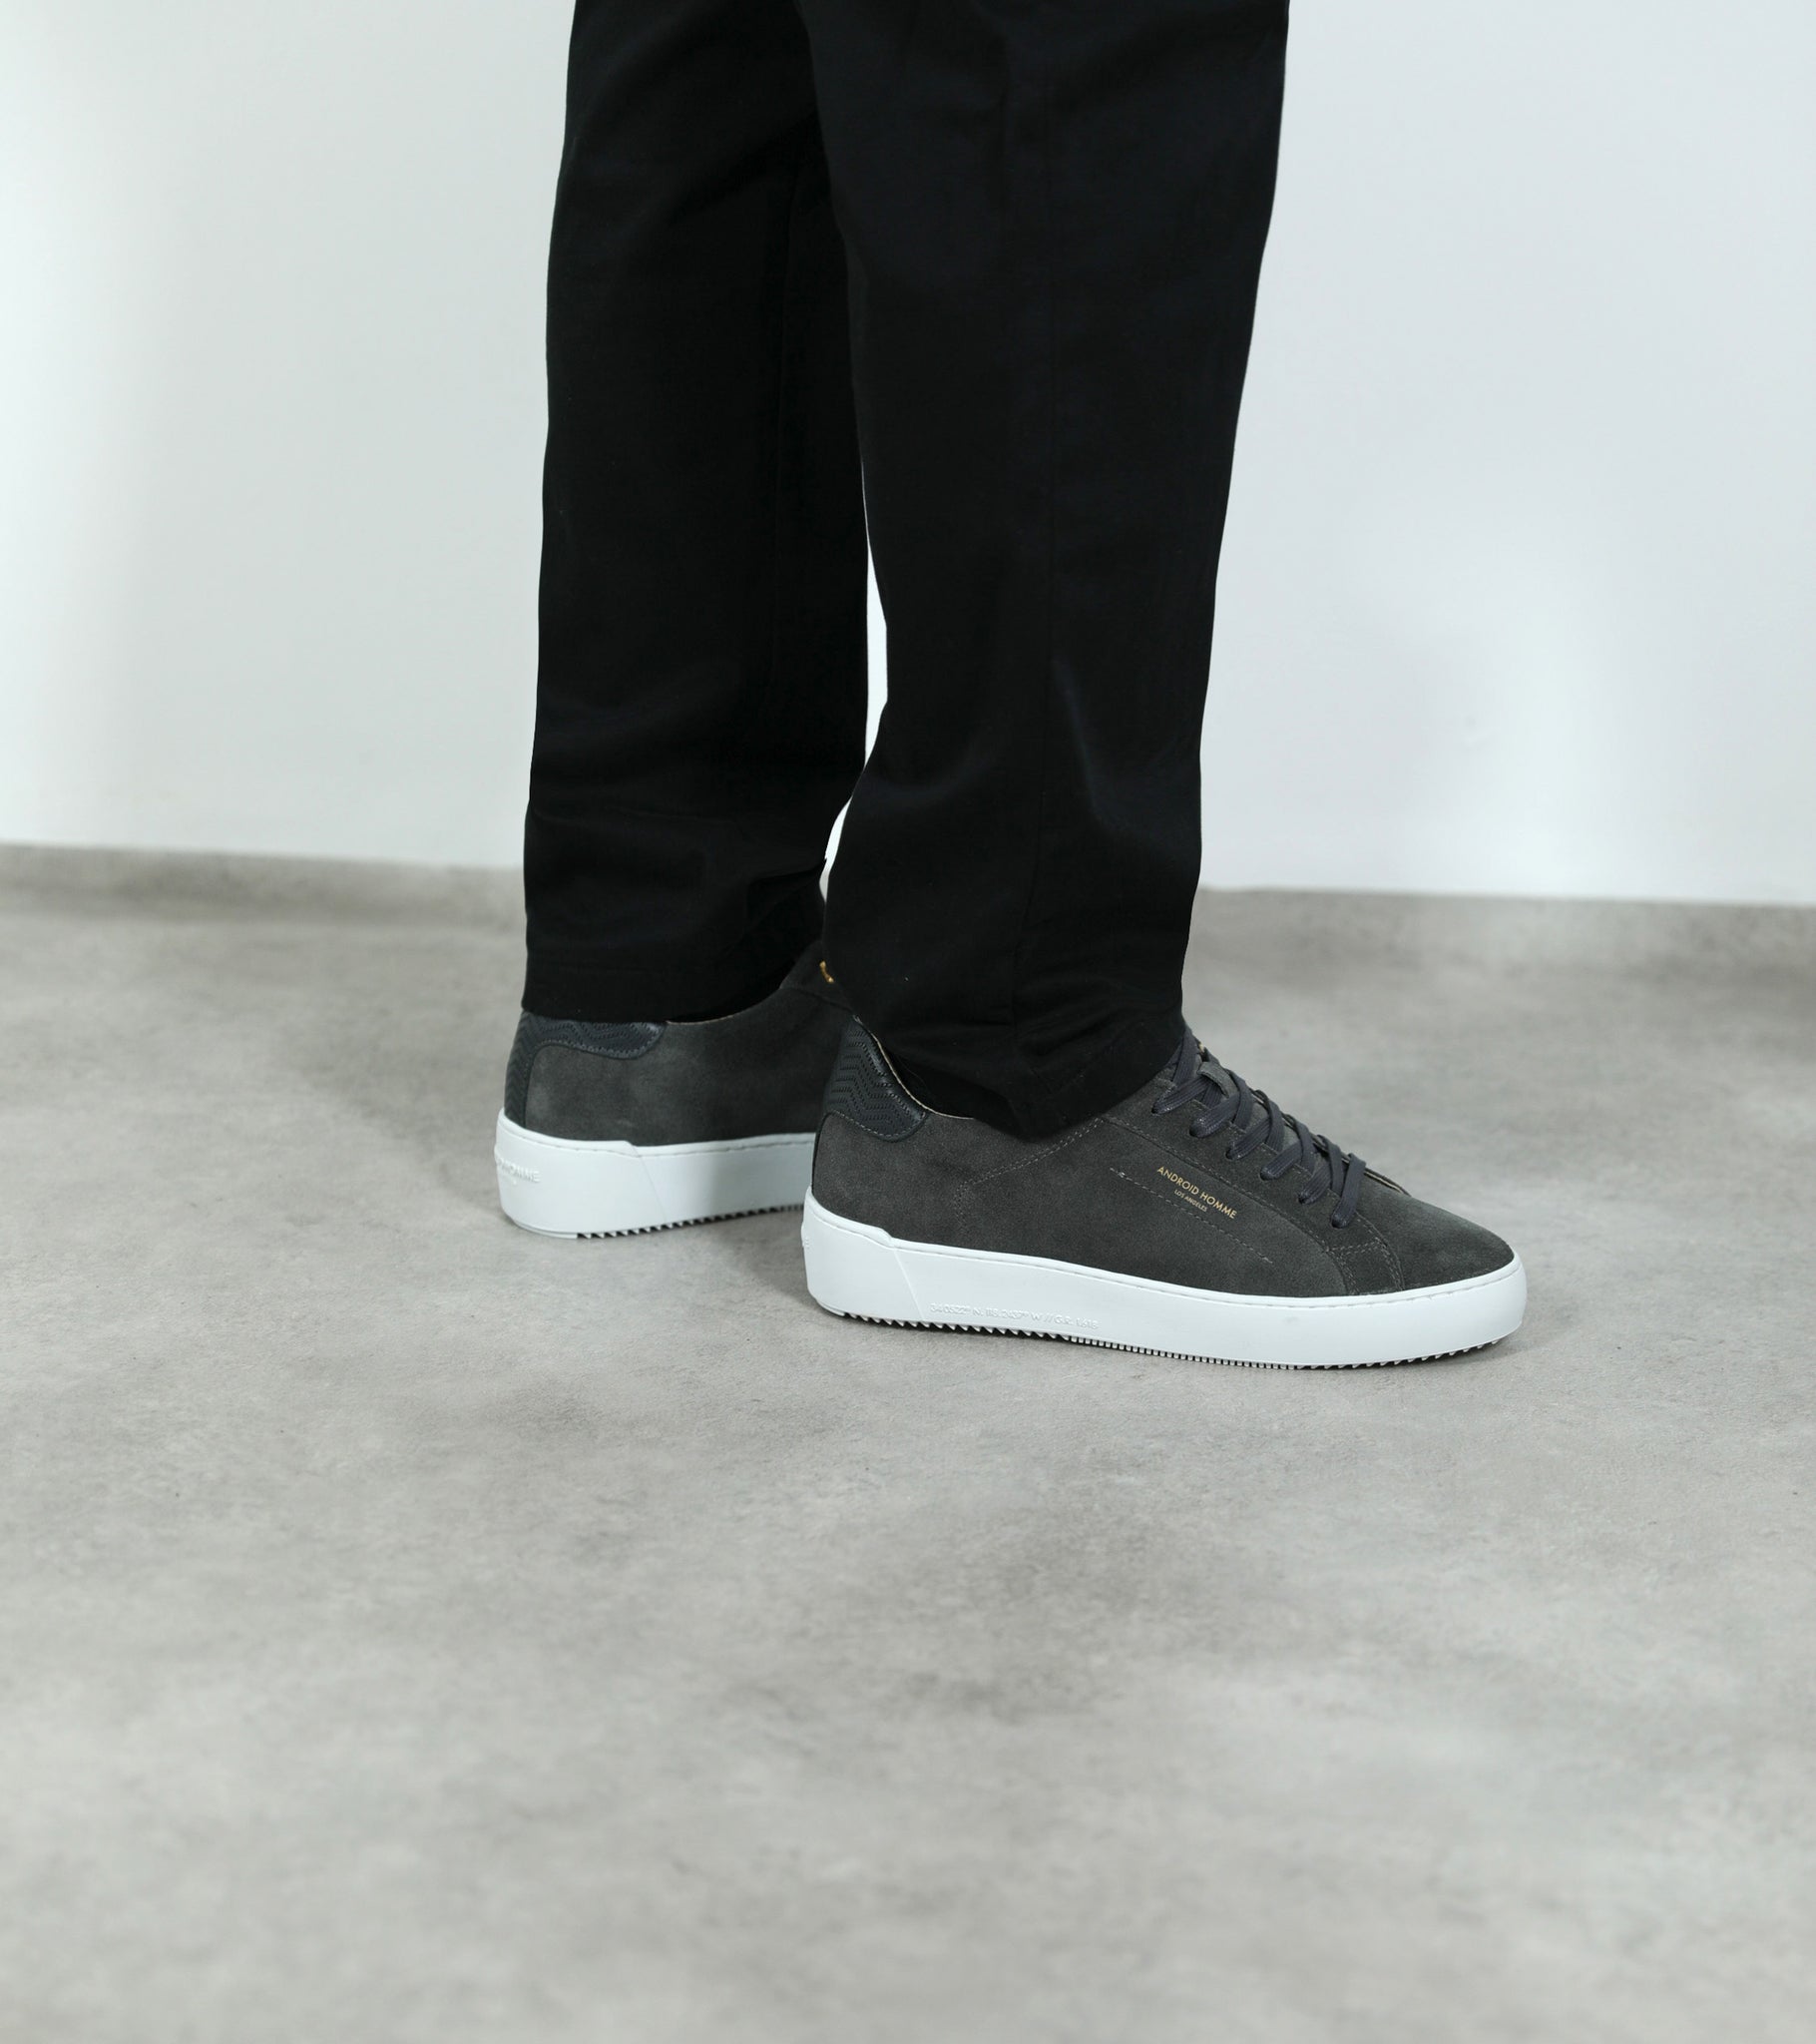 Ecom imagery of the Zuma Grey Suede Zig Zag Leather Android Homme Trainers on foot.